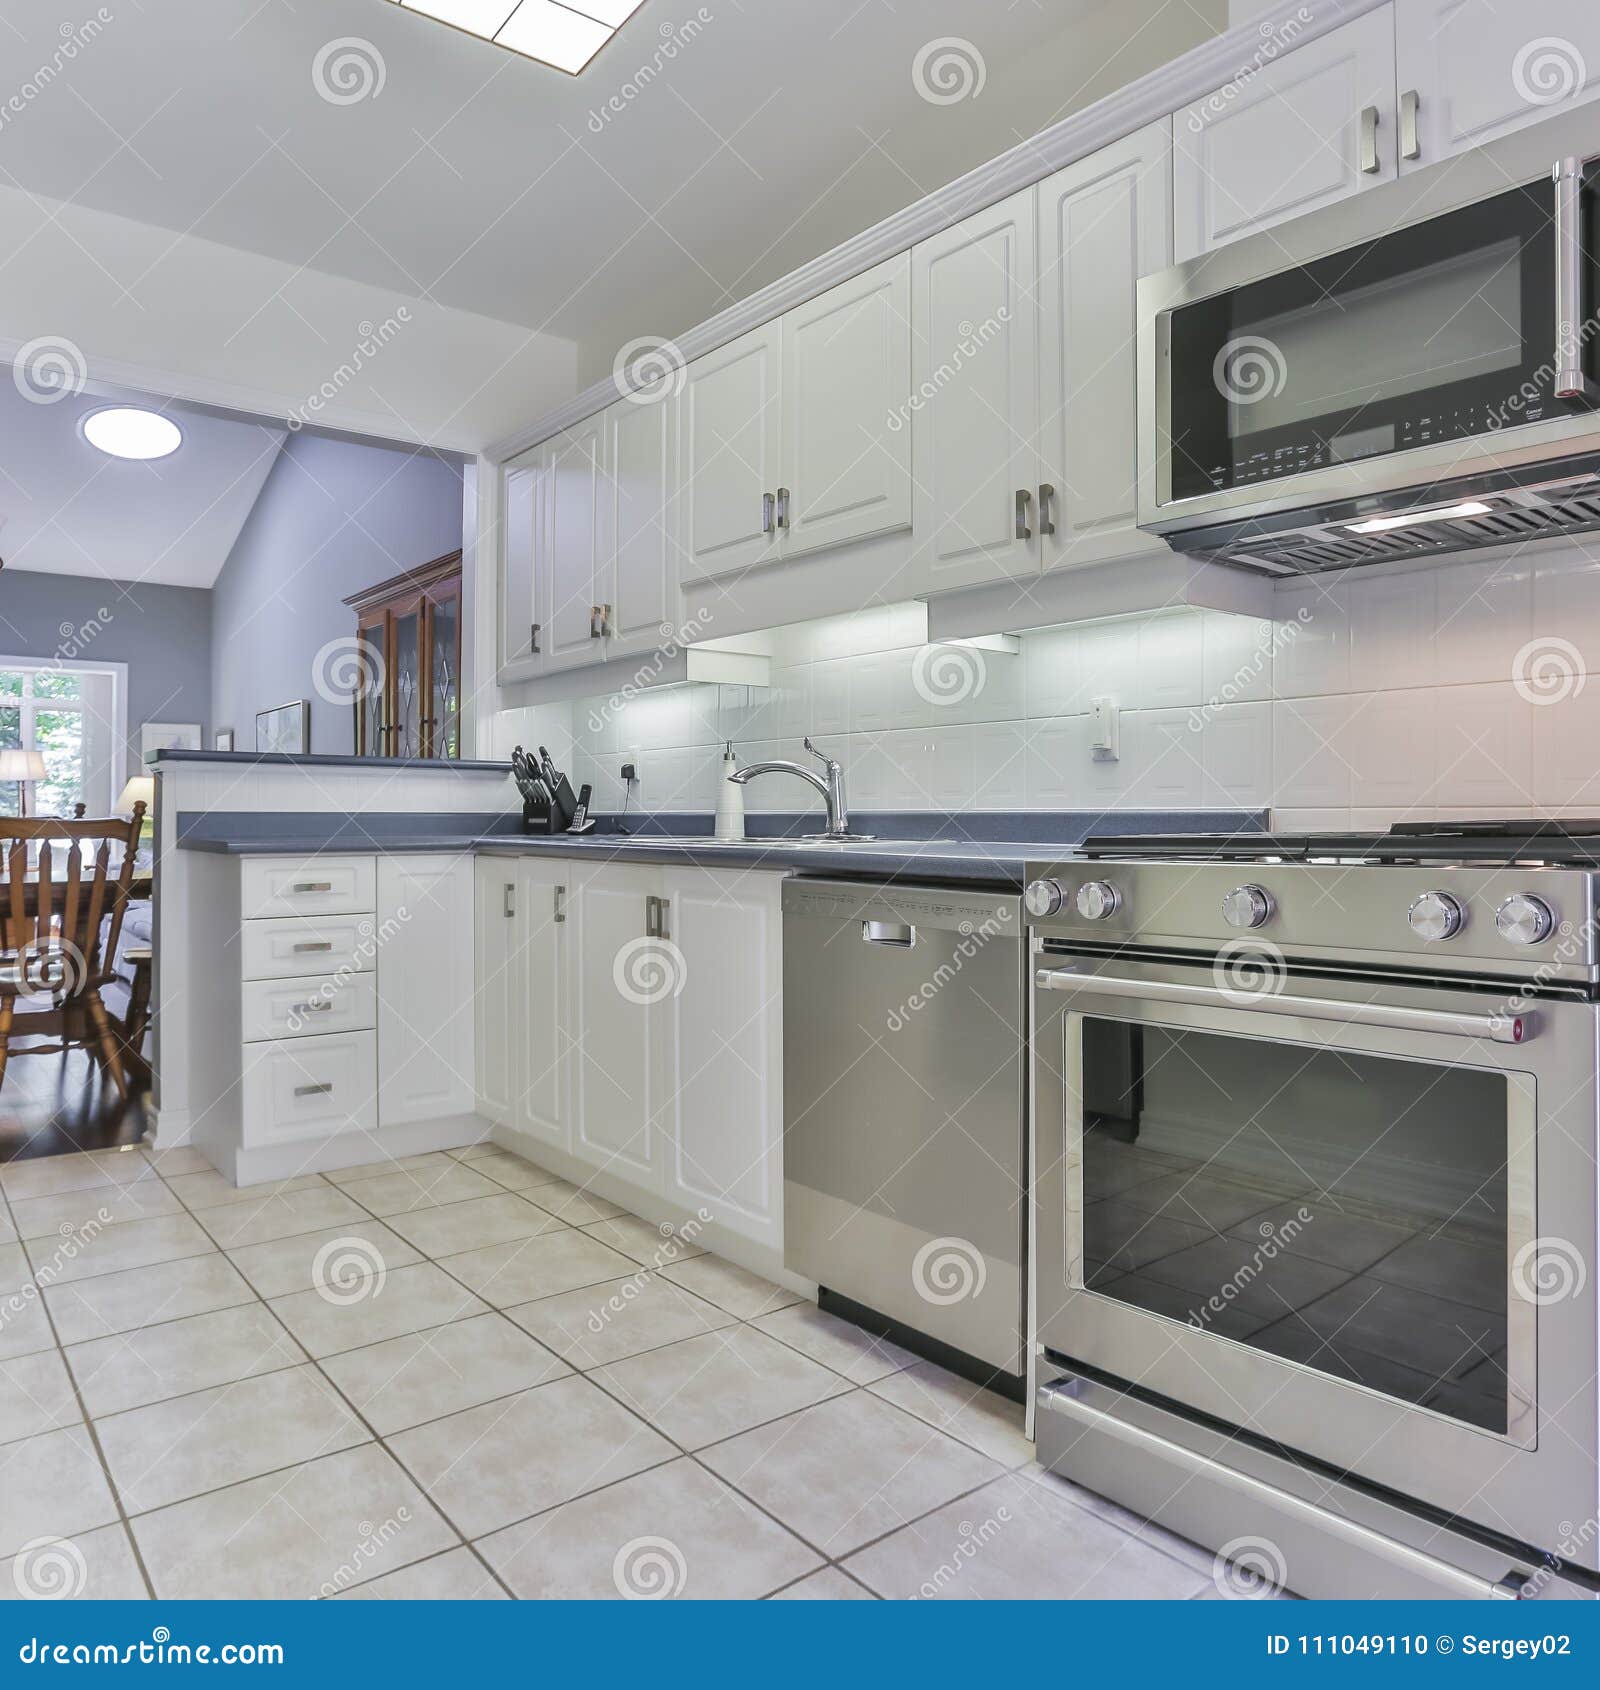 Kitchen Interior in New Luxury Home Stock Photo - Image of appliance ...